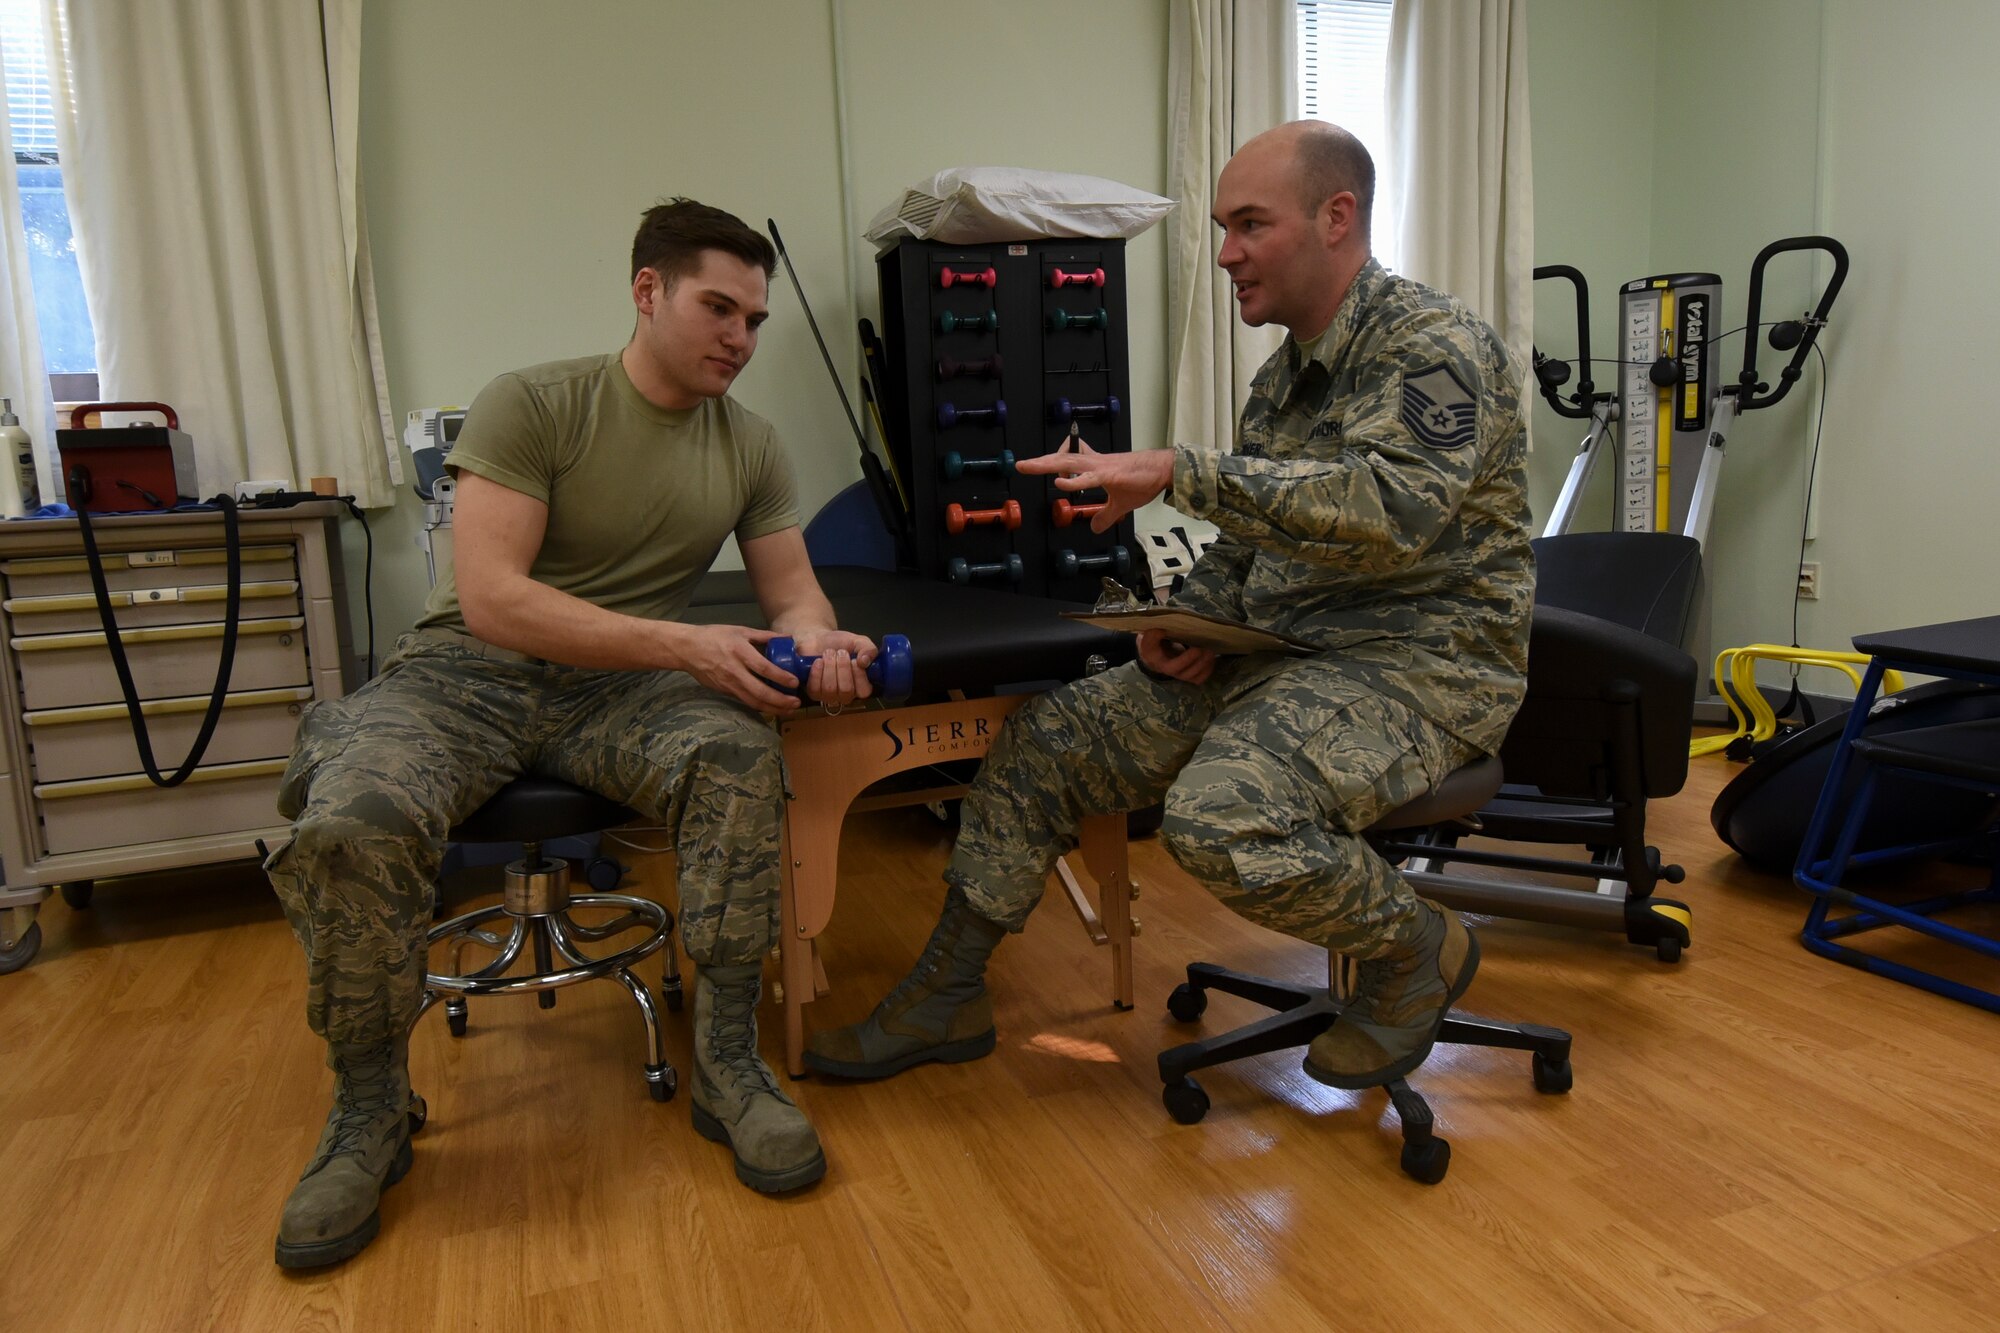 U.S. Air Force Master Sgt. Gregory Dorner, 8th Medical Operations Squadron Physical Therapy flight chief, talks with Senior Airman Tyler Macmillan, 8th Logistics Readiness Squadron Material Handling Equipment maintenance journeyman, about his treatment progress while performing wrist exercises during a physical therapy appointment at Kunsan Air Base, Republic of Korea, Feb. 13, 2017. The physical therapy section is responsible for ensuring proper healing and rehabilitation of Airmen who have injuries or are recovering from surgeries. Once approved through their primary care manager, Airmen can make an appointment to visit the physical therapy section to ensure they are in the best shape to perform their duties. (U.S. Air Force photo by Senior Airman Michael Hunsaker/Released)